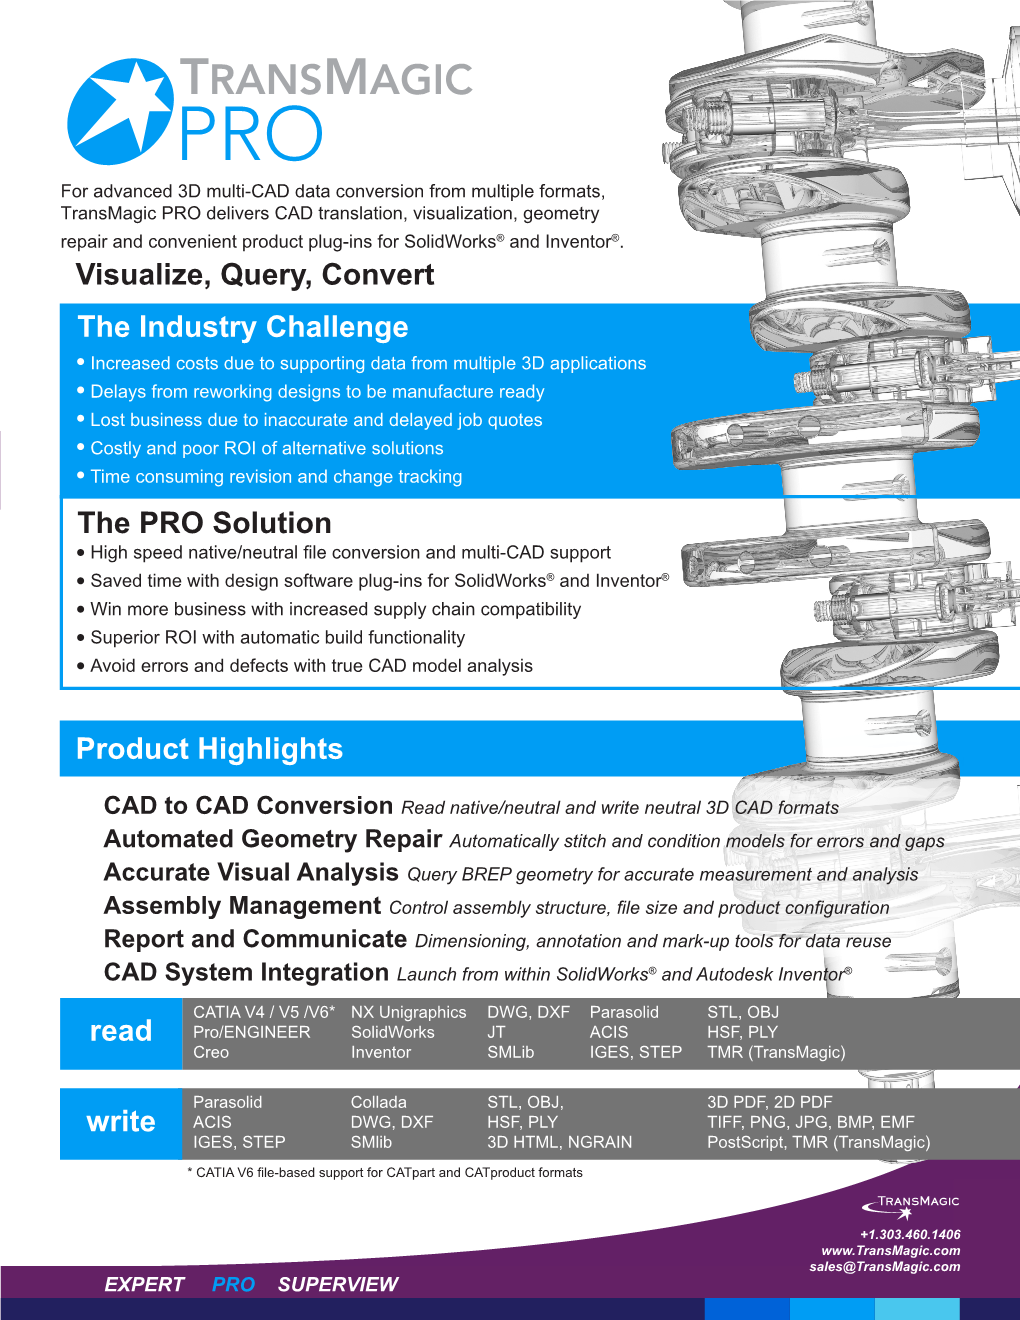 Visualize, Query, Convert the Industry Challenge